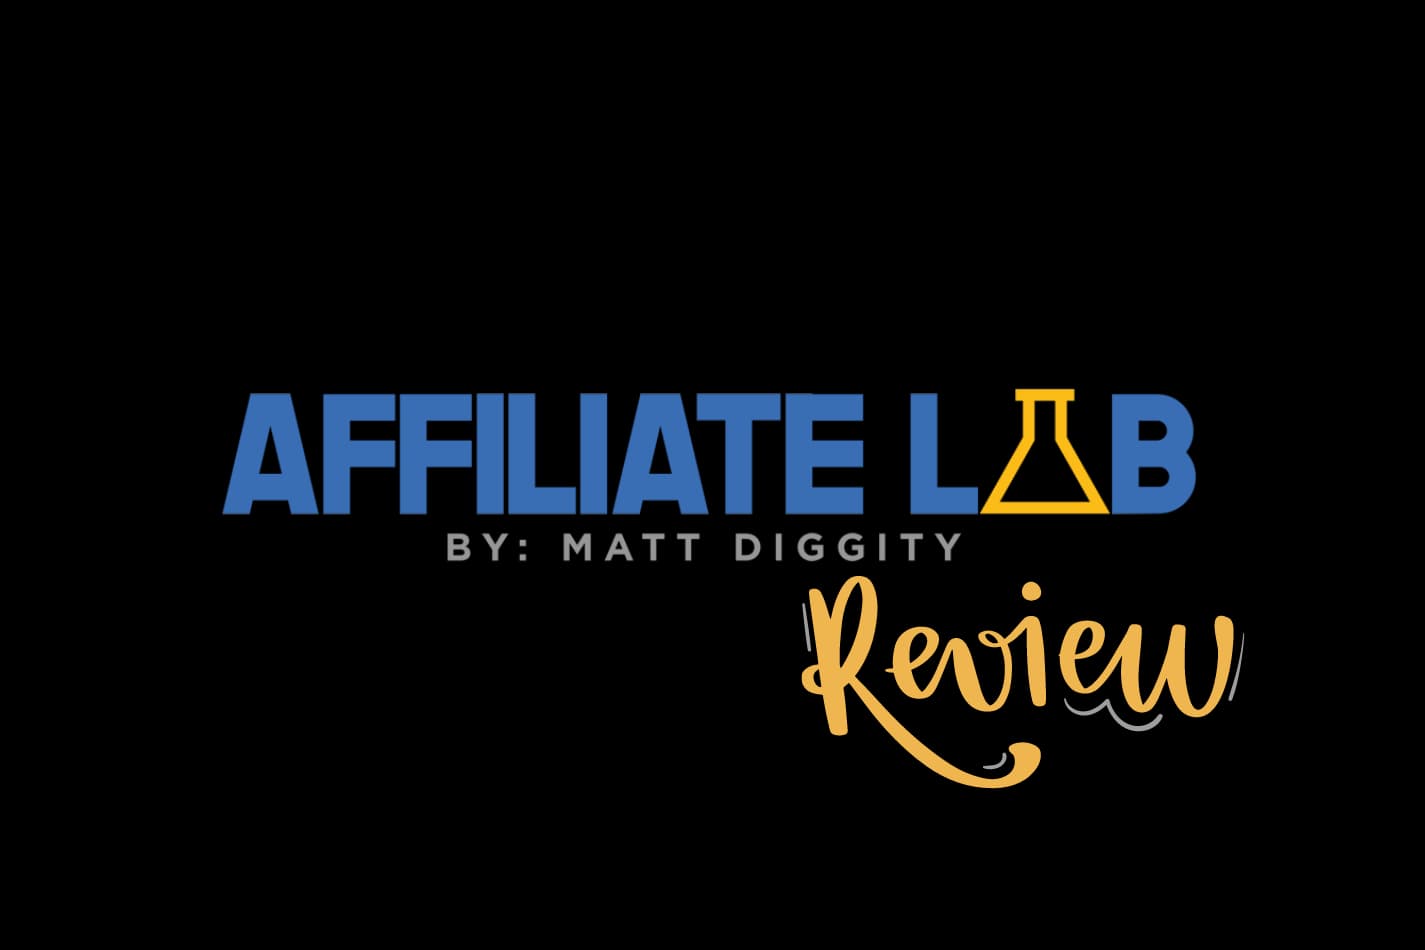 The Affiliate Lab by Matt Diggity logo with addition of scripted review underneath